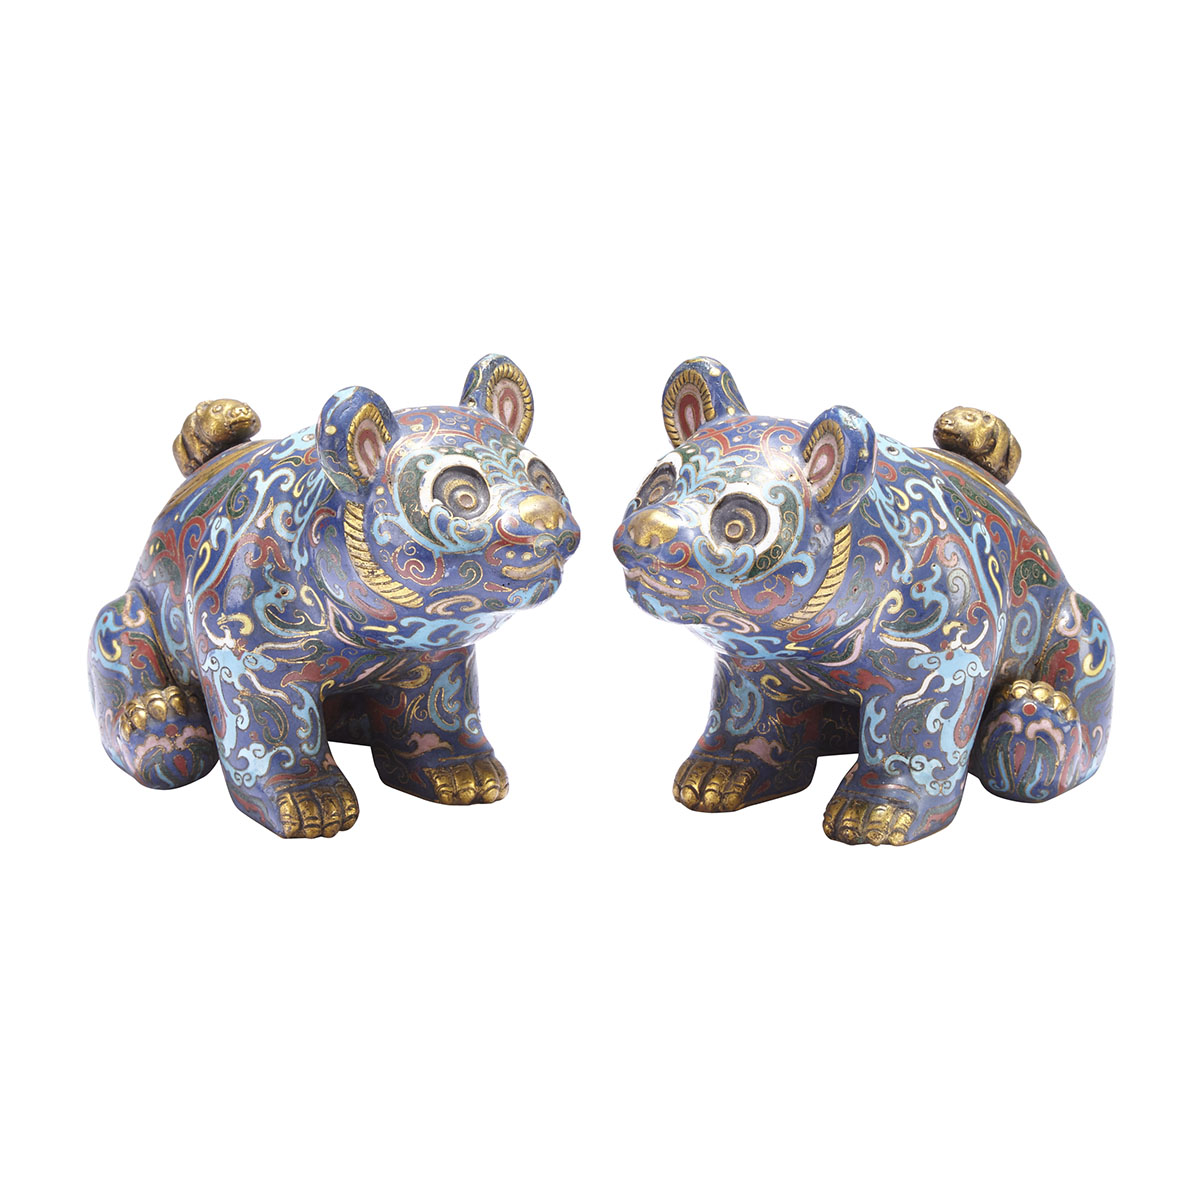 A Pair of Chinese Cloisonné Censers and Covers Shaped as Panda Bears, Early 20th Century